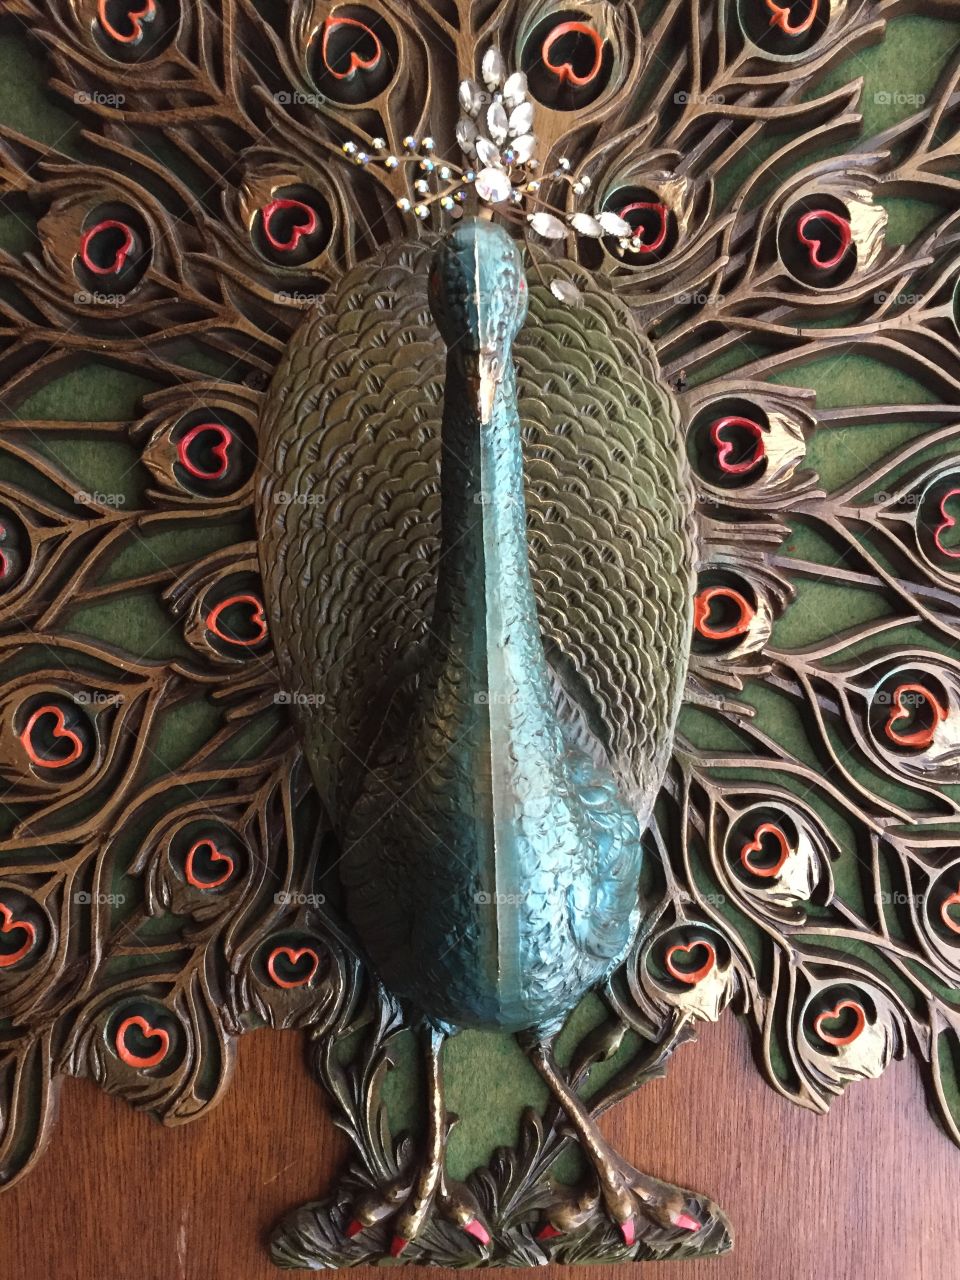 Painted Peacock woodcarving.